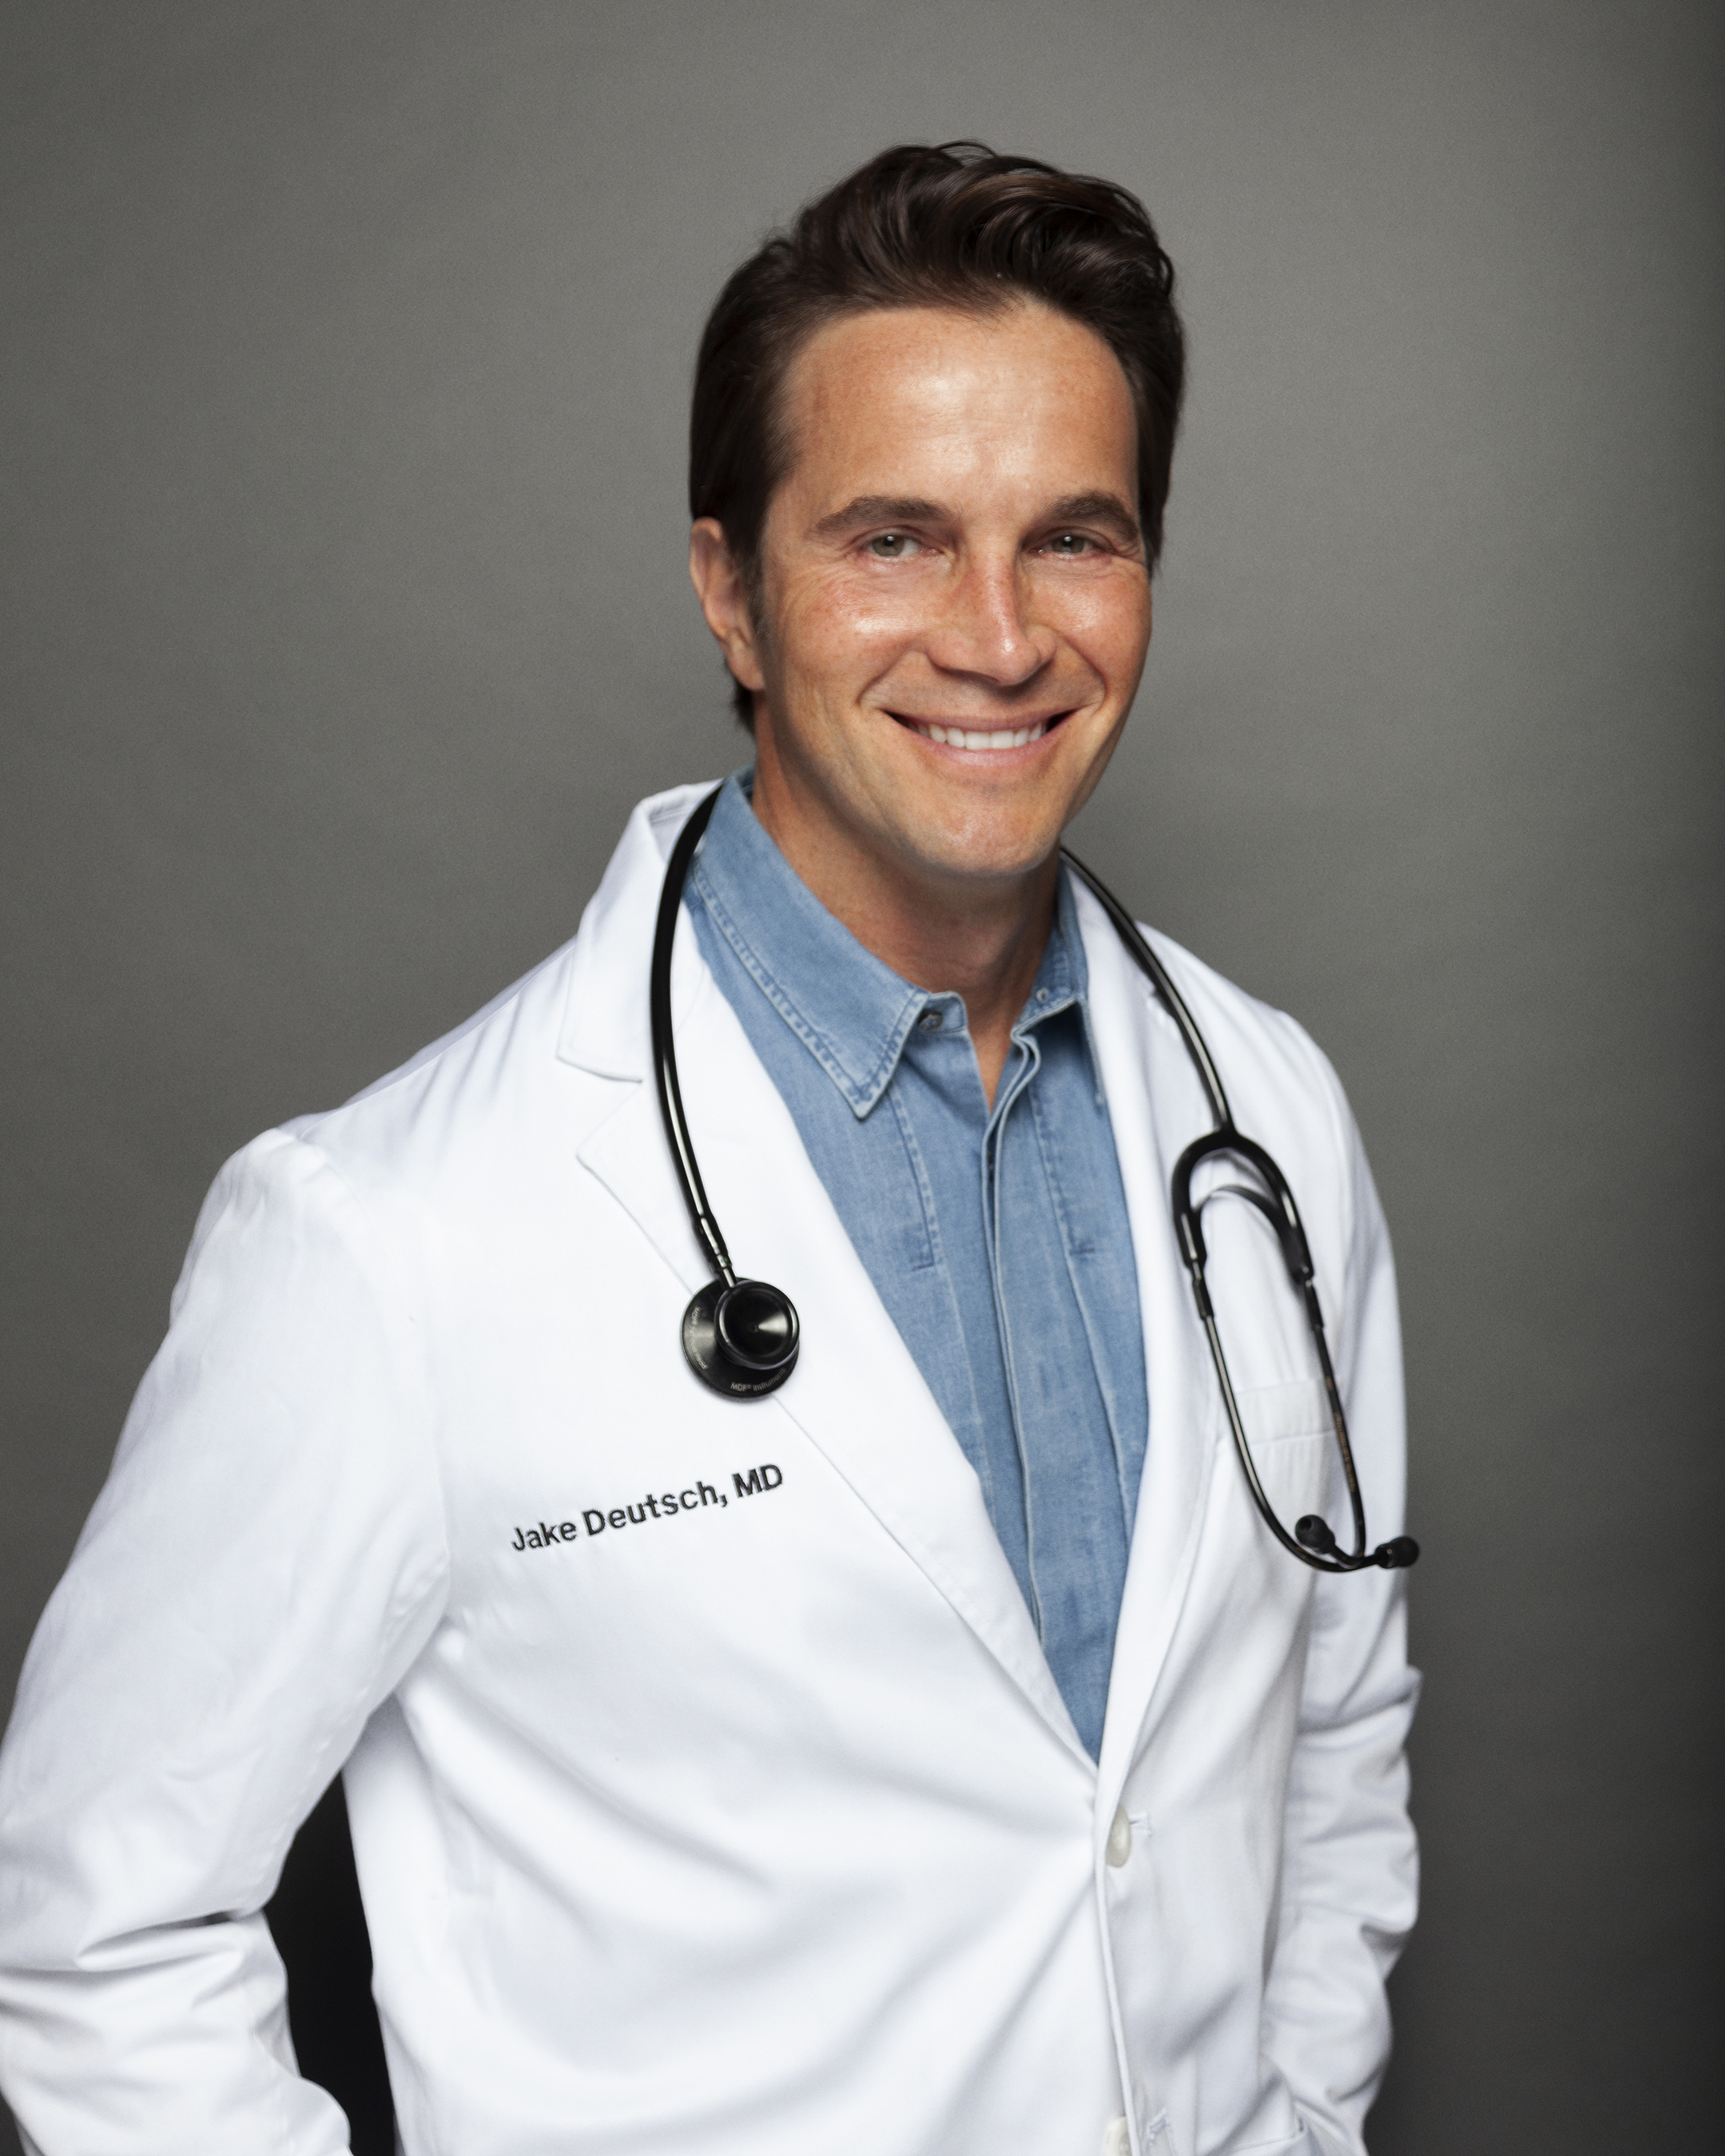 Dr. Jake Deutsch, Founder and Clinical Director at Cure Urgent Care in New York City